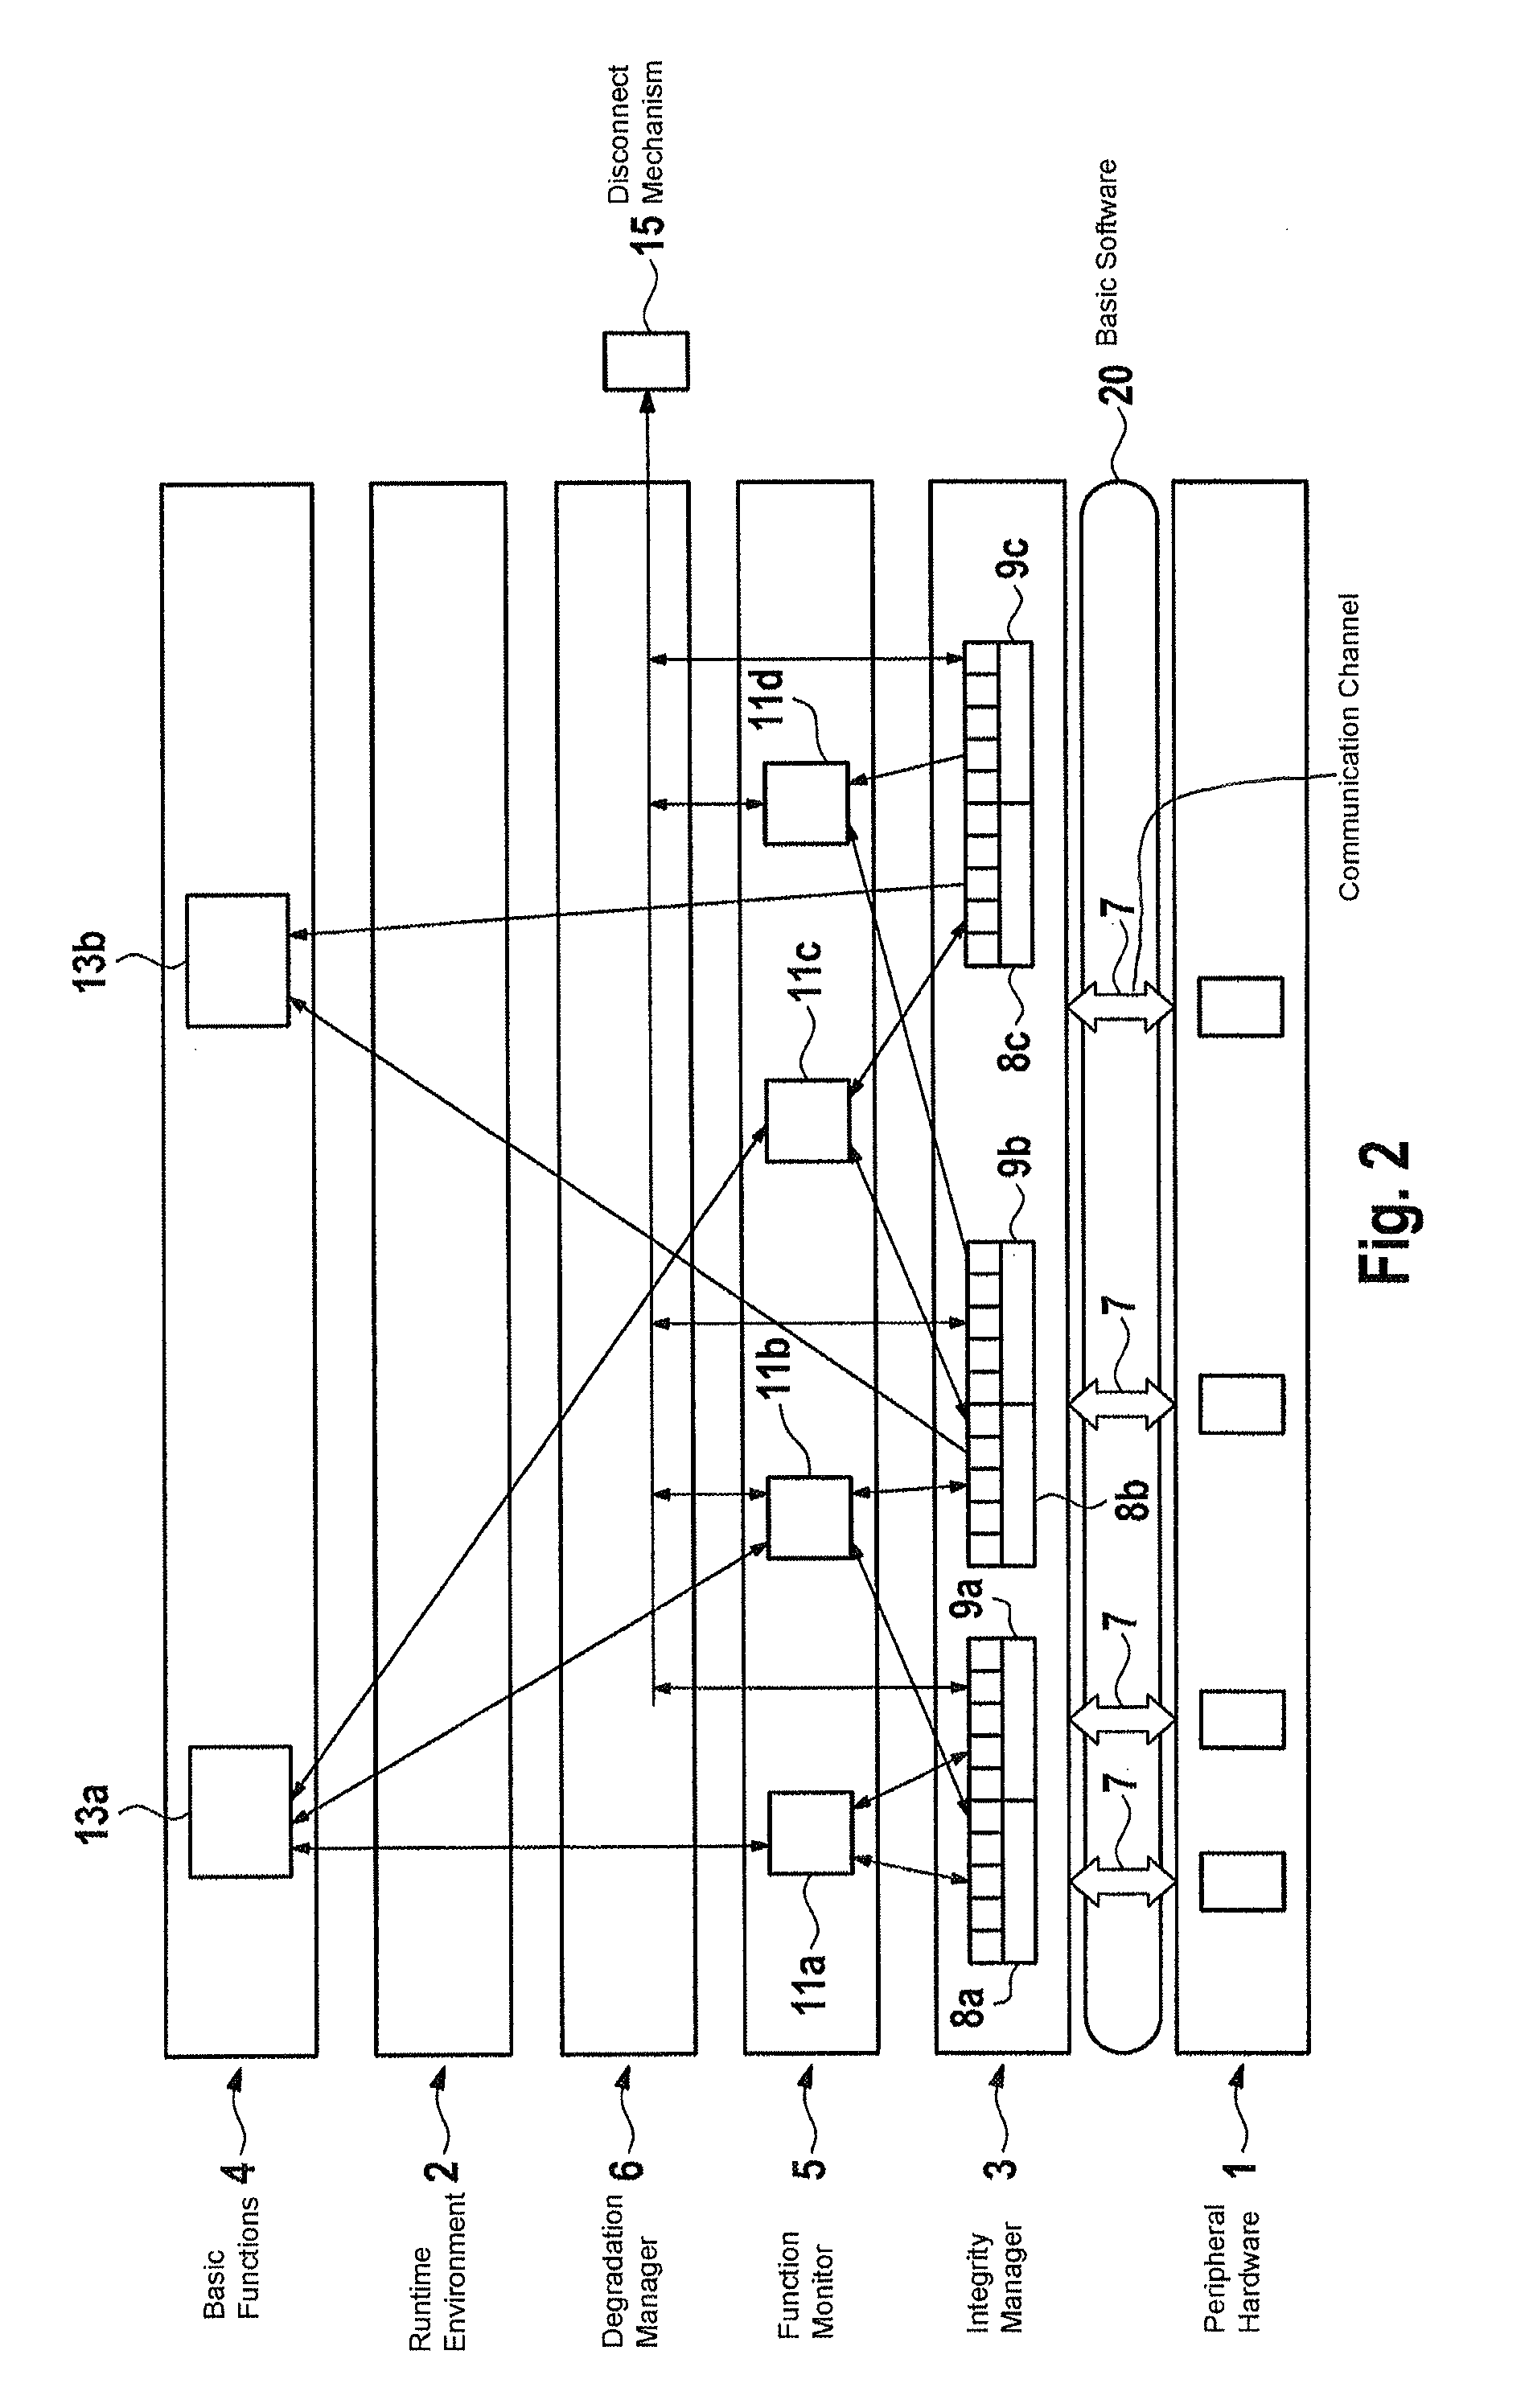 Method and system for analyzing integrity of encrypted data in electronic control system for motor vehicle